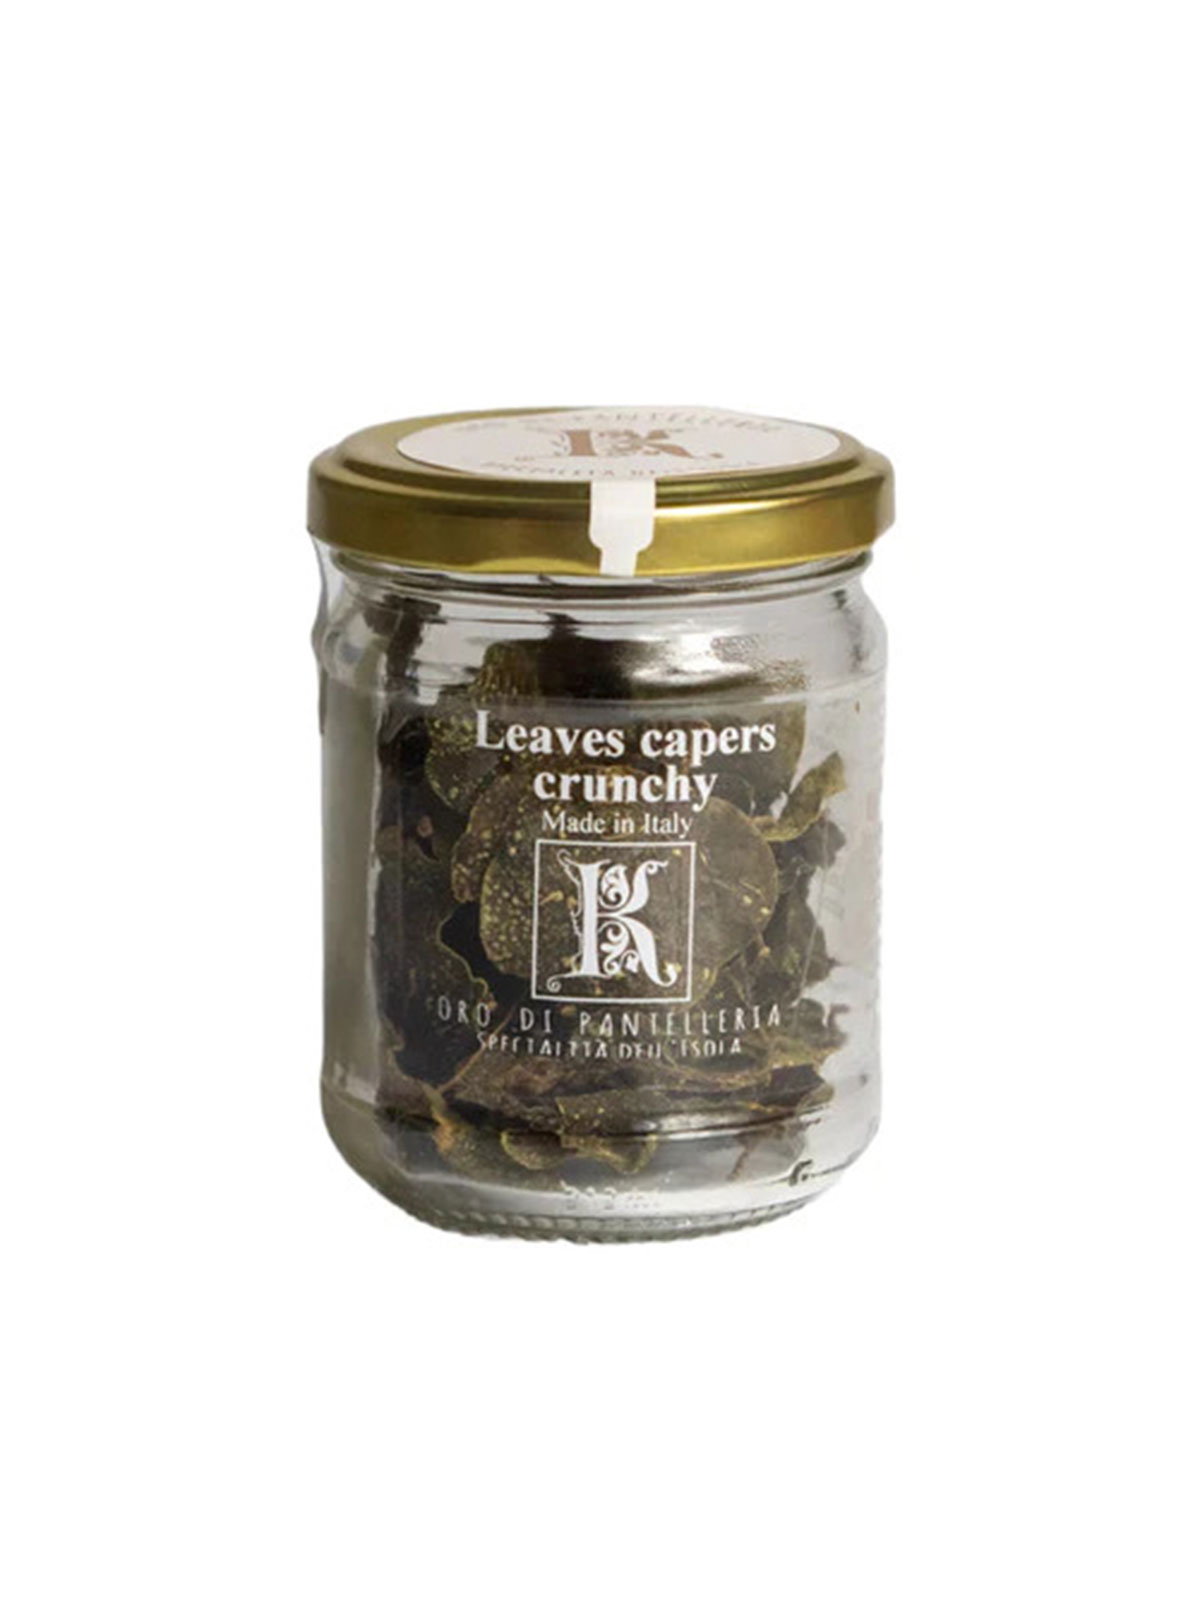 KAZZEN CRUNCHY CAPER LEAVES 10 GR - Olives & Capers, Pantry - Buon'Italia